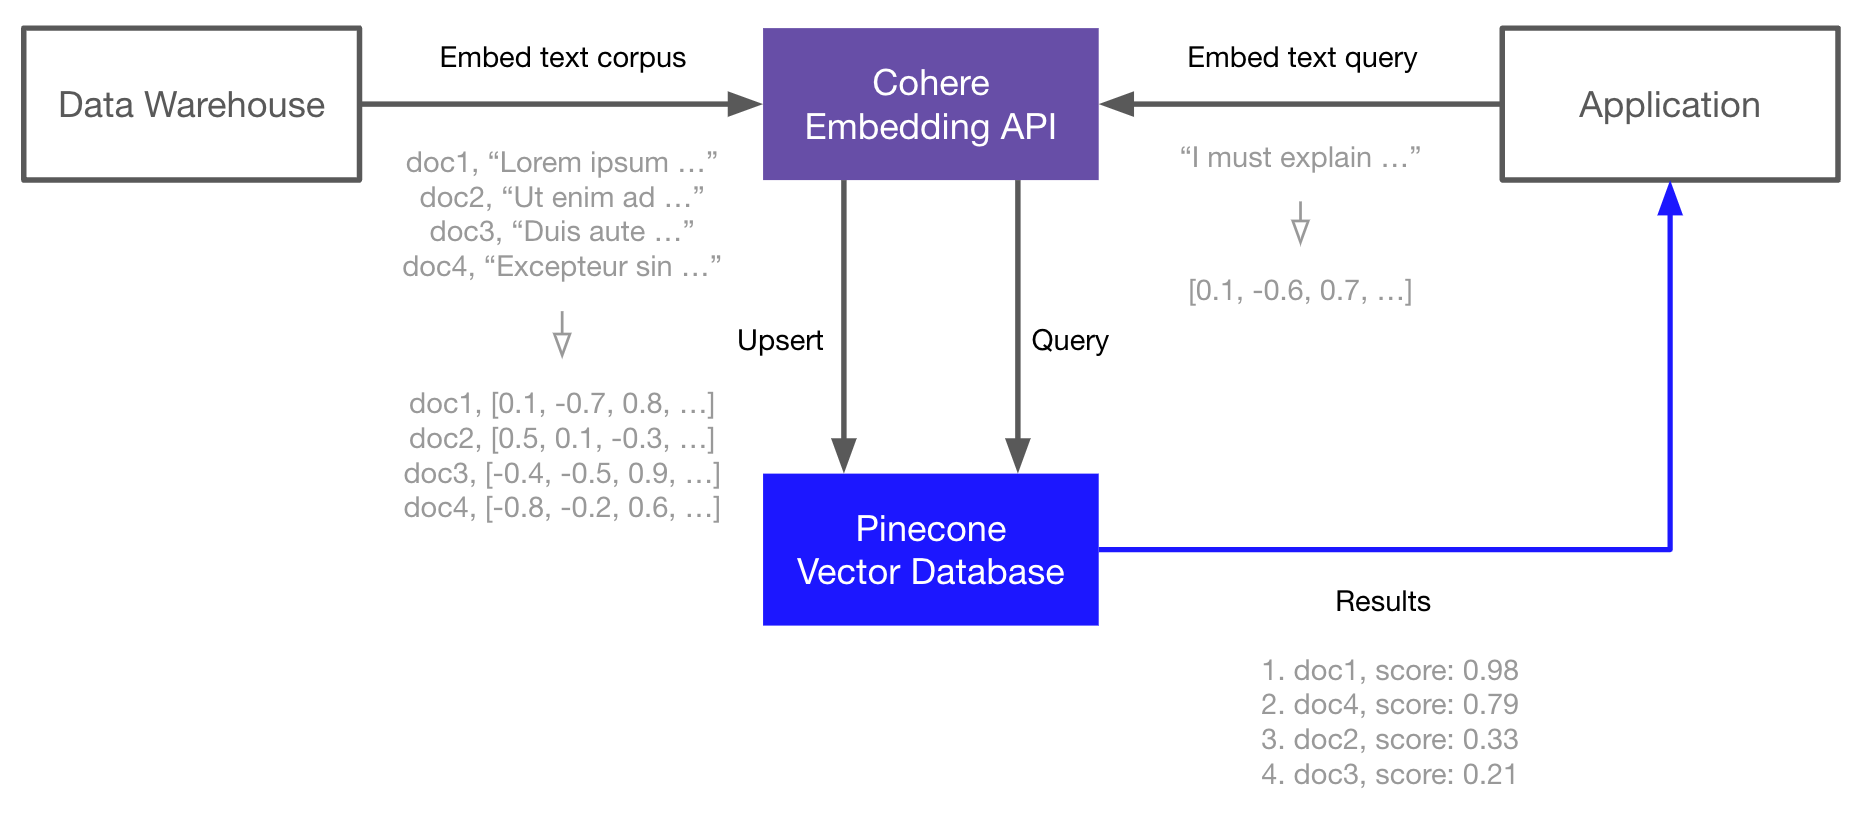 Basic workflow of Cohere with Pinecone